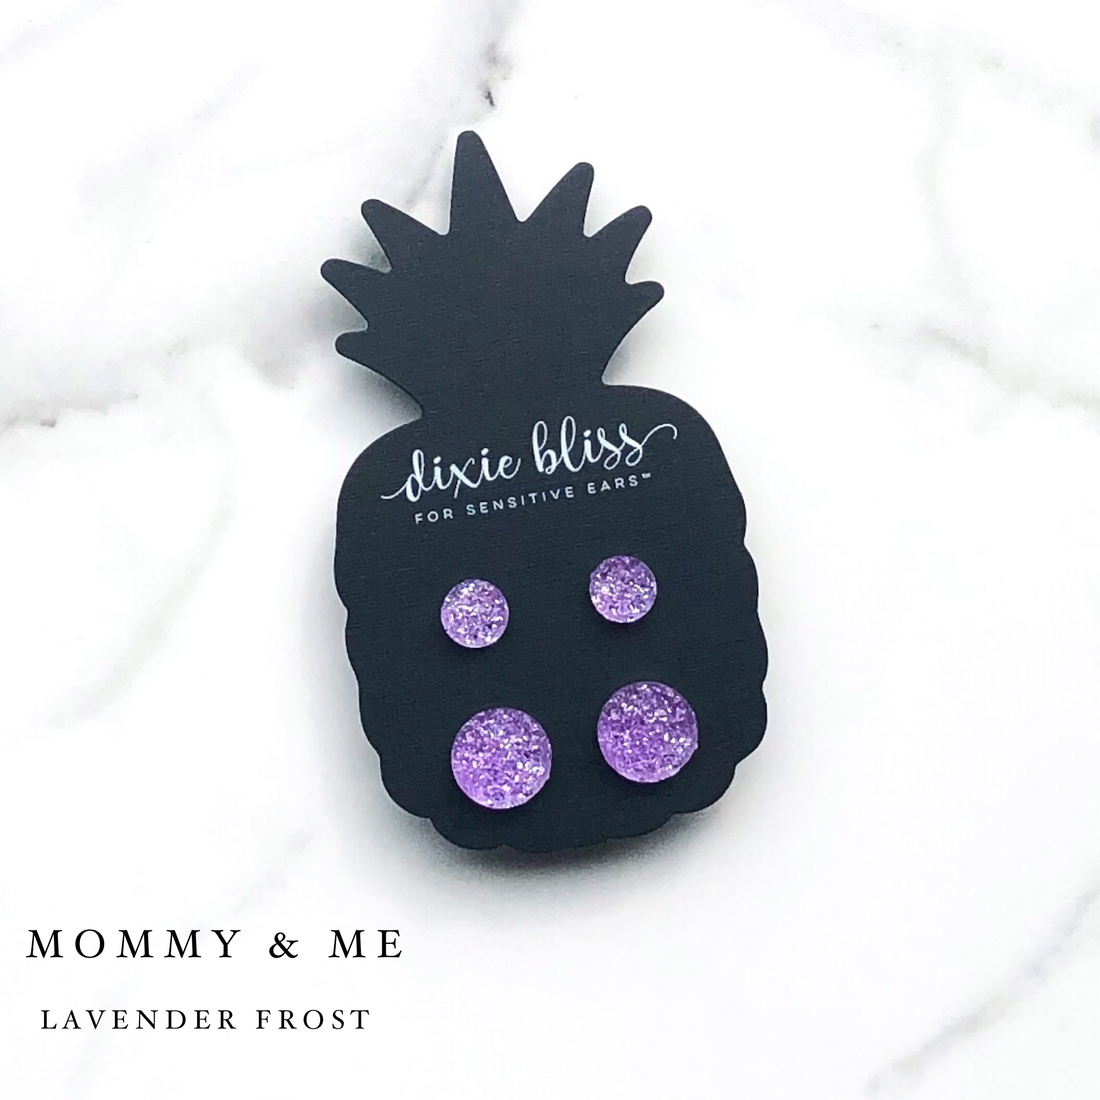 Mommy & Me - Dixie Bliss - Duo Stud Earring Sets